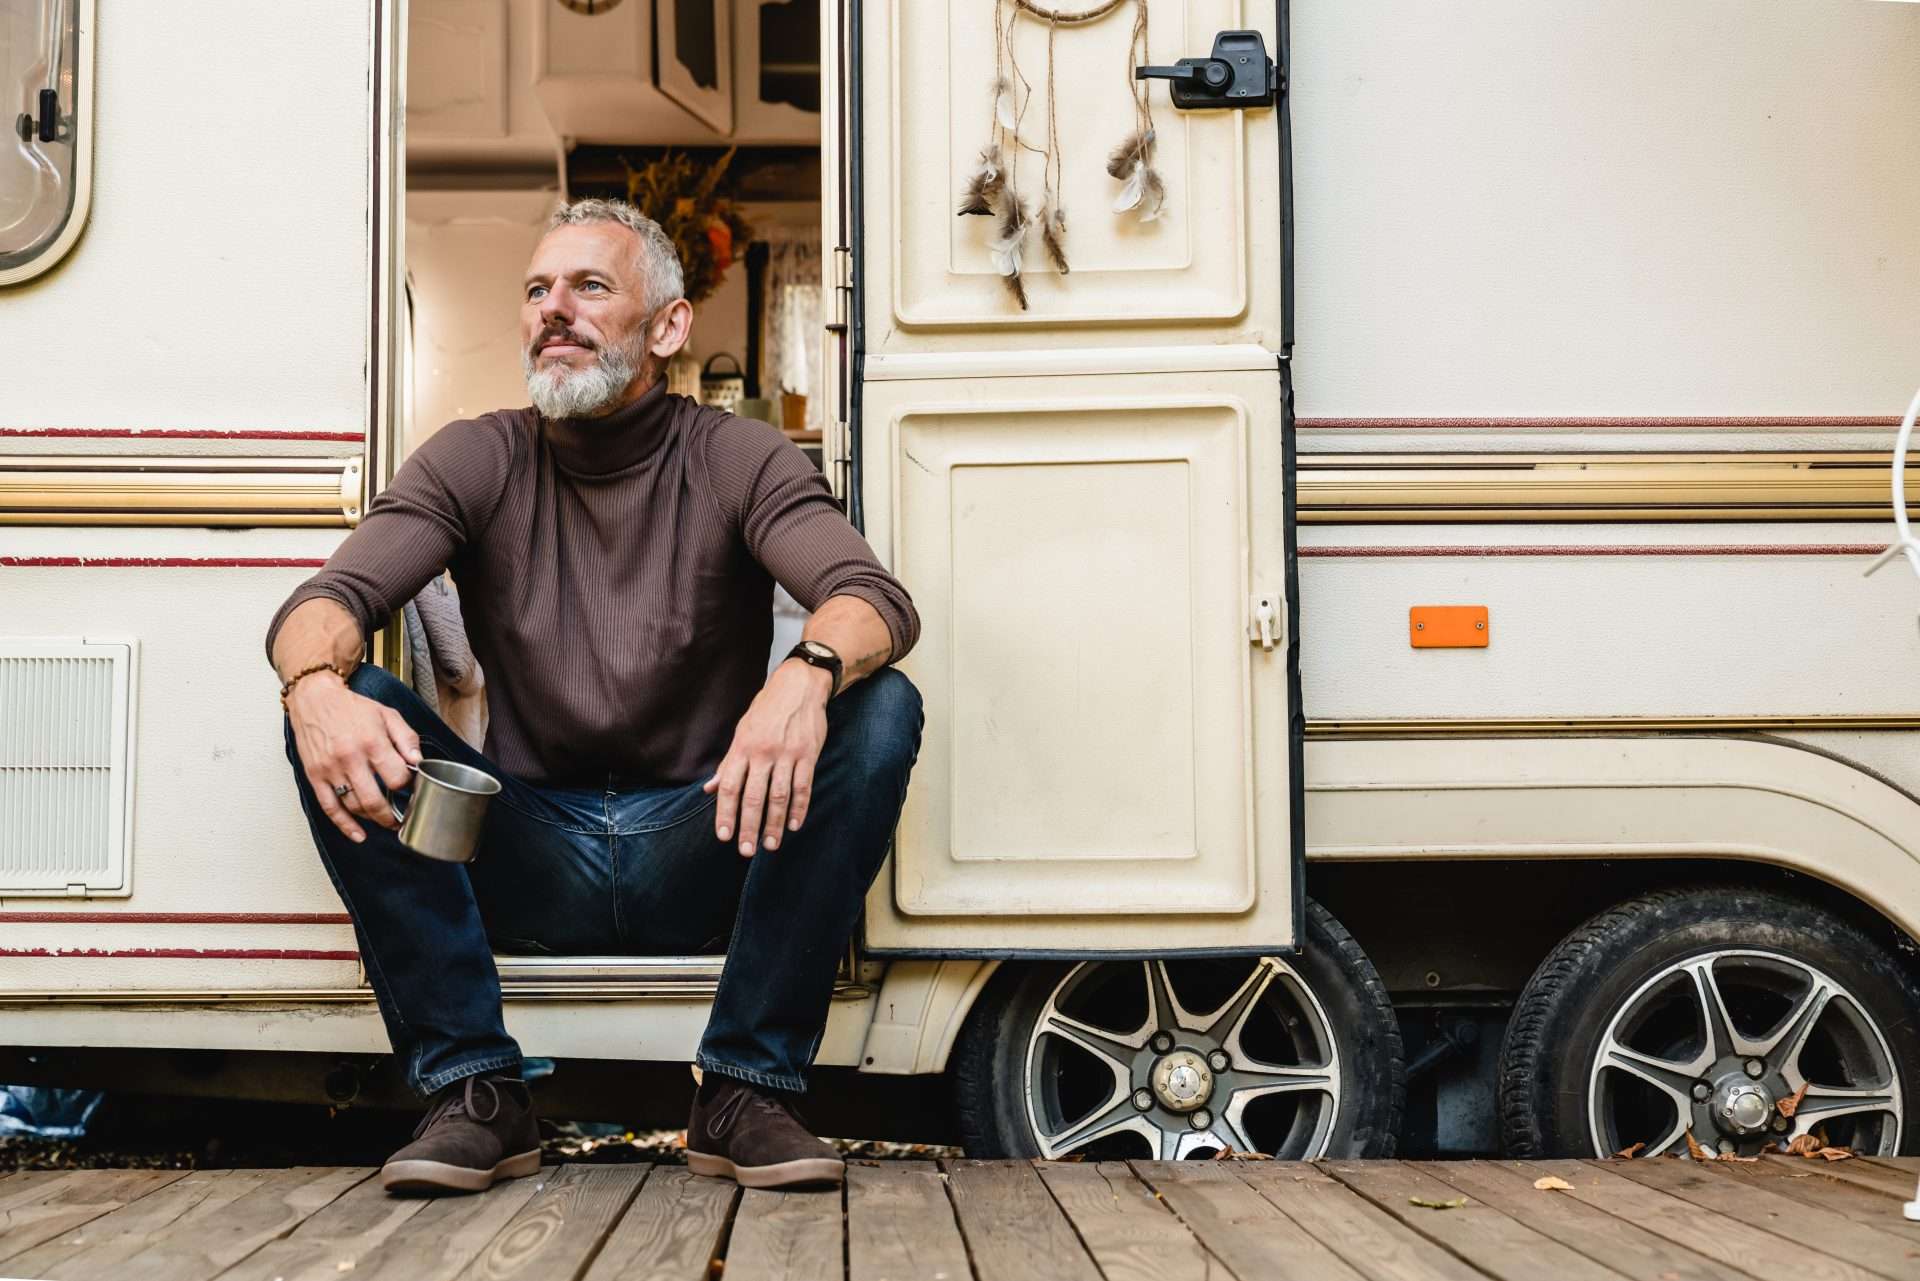 Older man posing in front of an RV